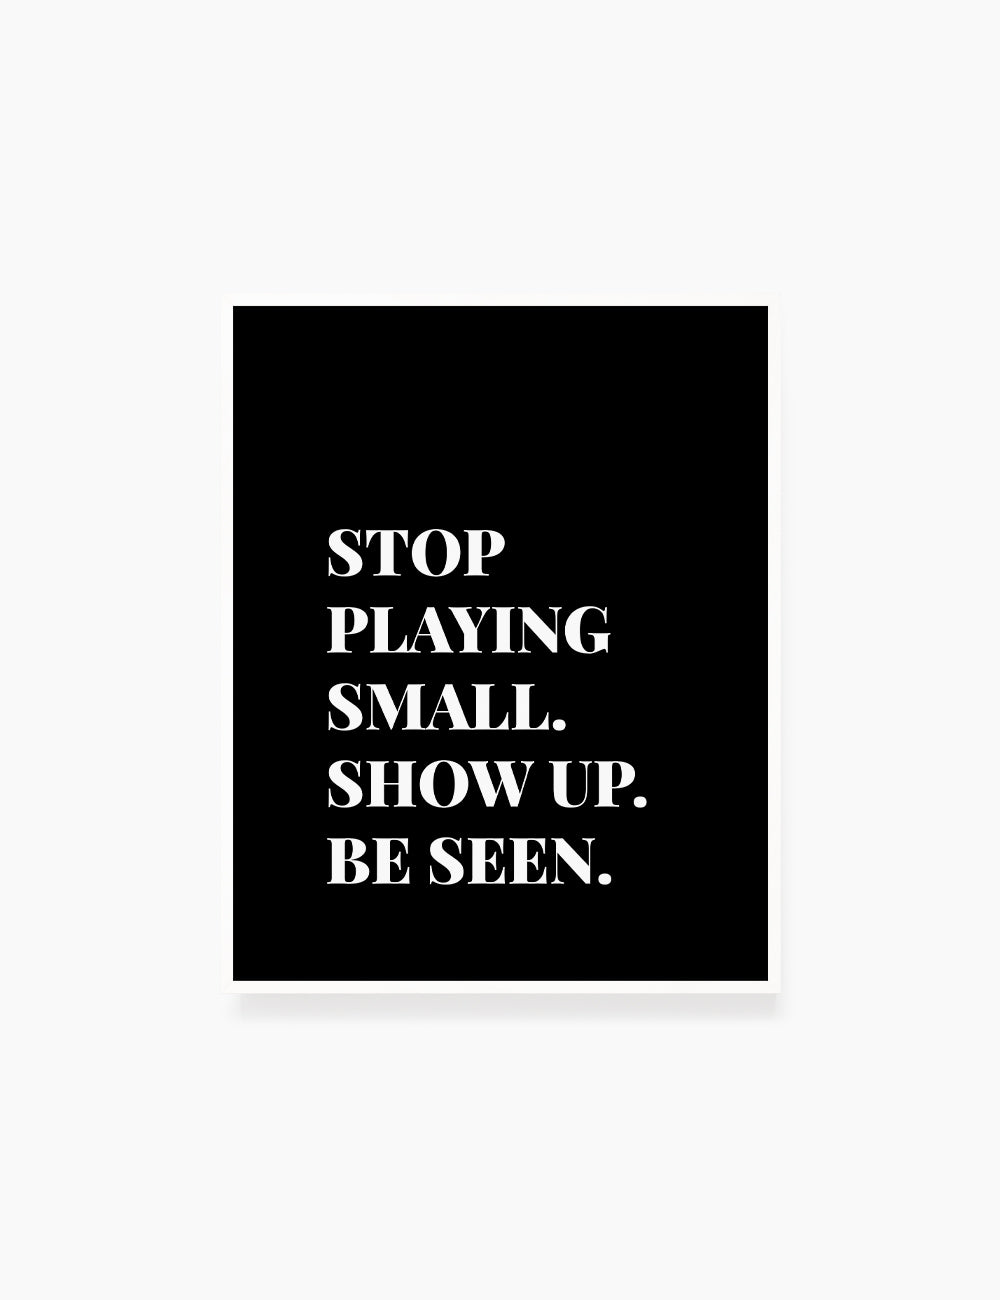 Printable Wall Art Quote: STOP PLAYING SMALL. Printable Poster. Inspirational Quote. Motivational Quote. WA026 - Paper Moon Art & Design